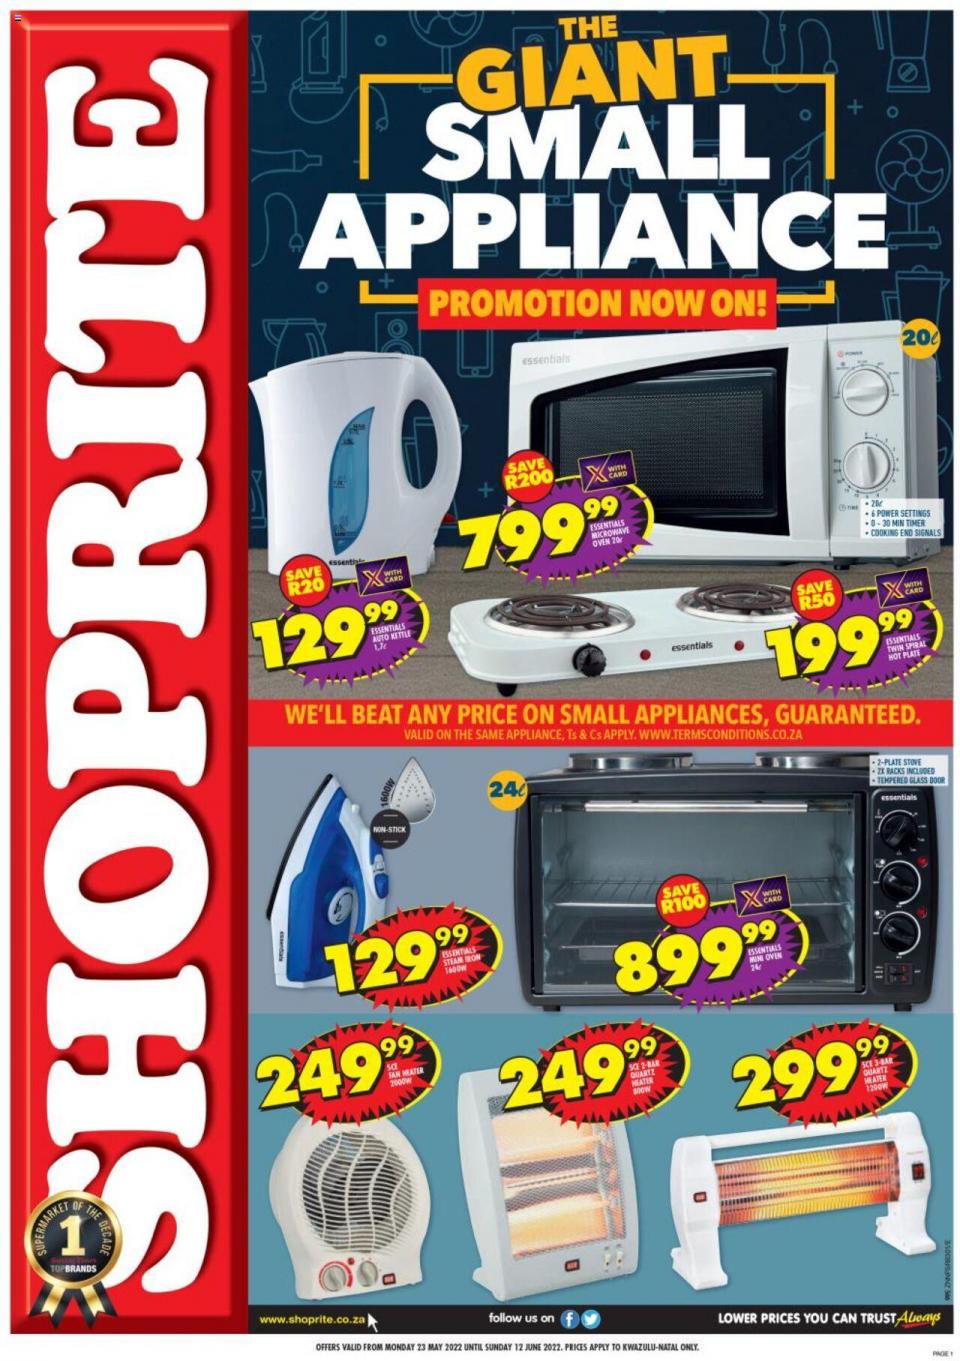 Shoprite Specials Small Appliance 23 May – 12 June 2022